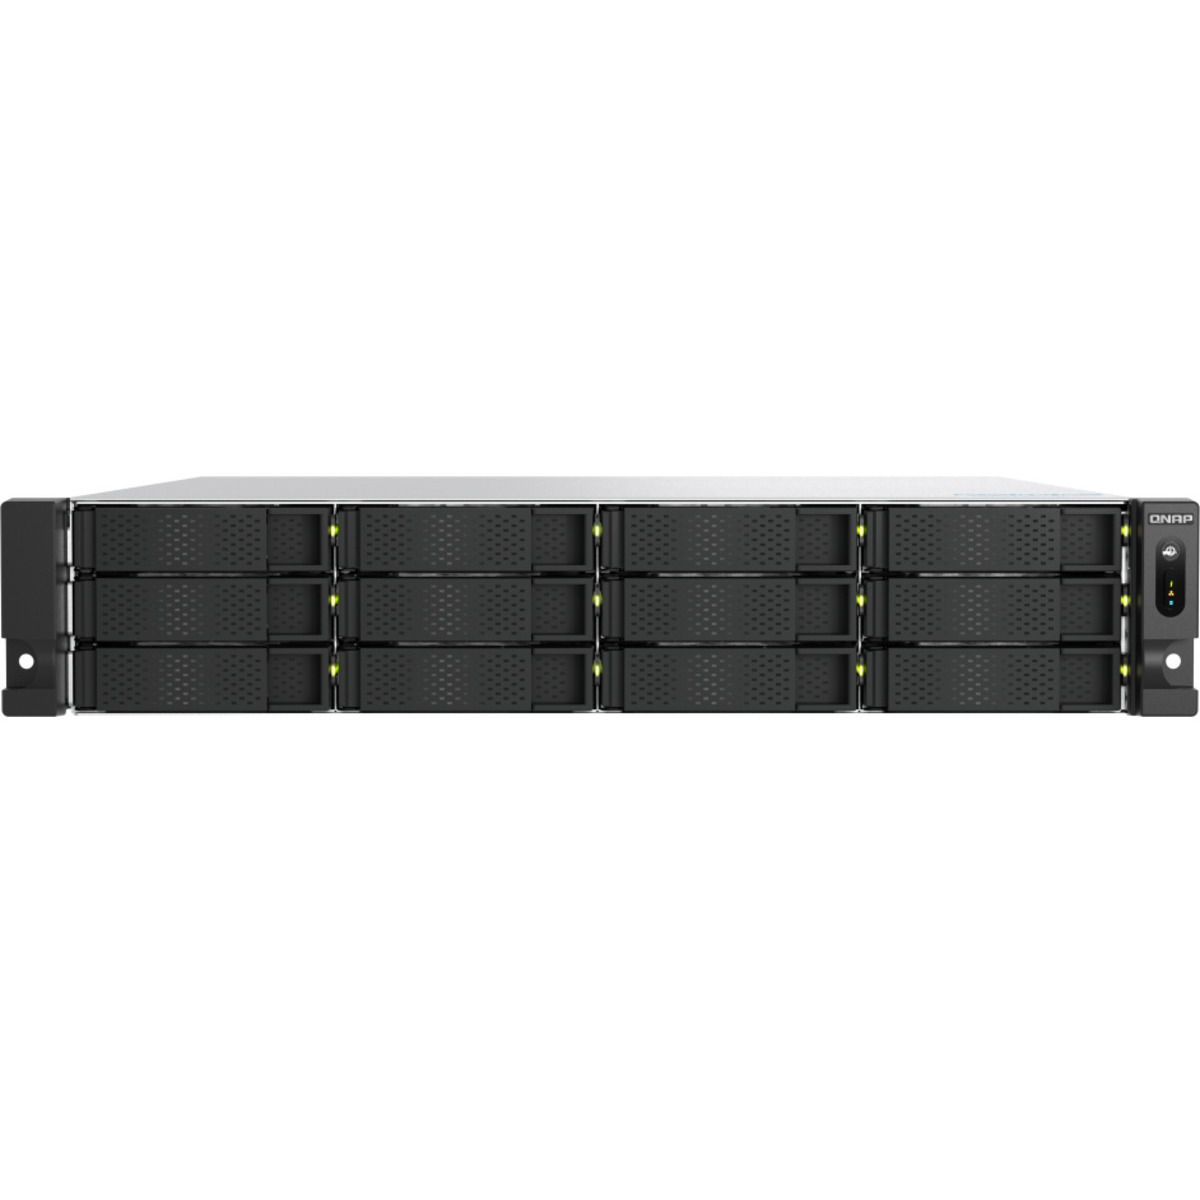 QNAP TS-h1277AXU-RP5 NAS - Network Attached Storage Device Burn-In Tested Configurations